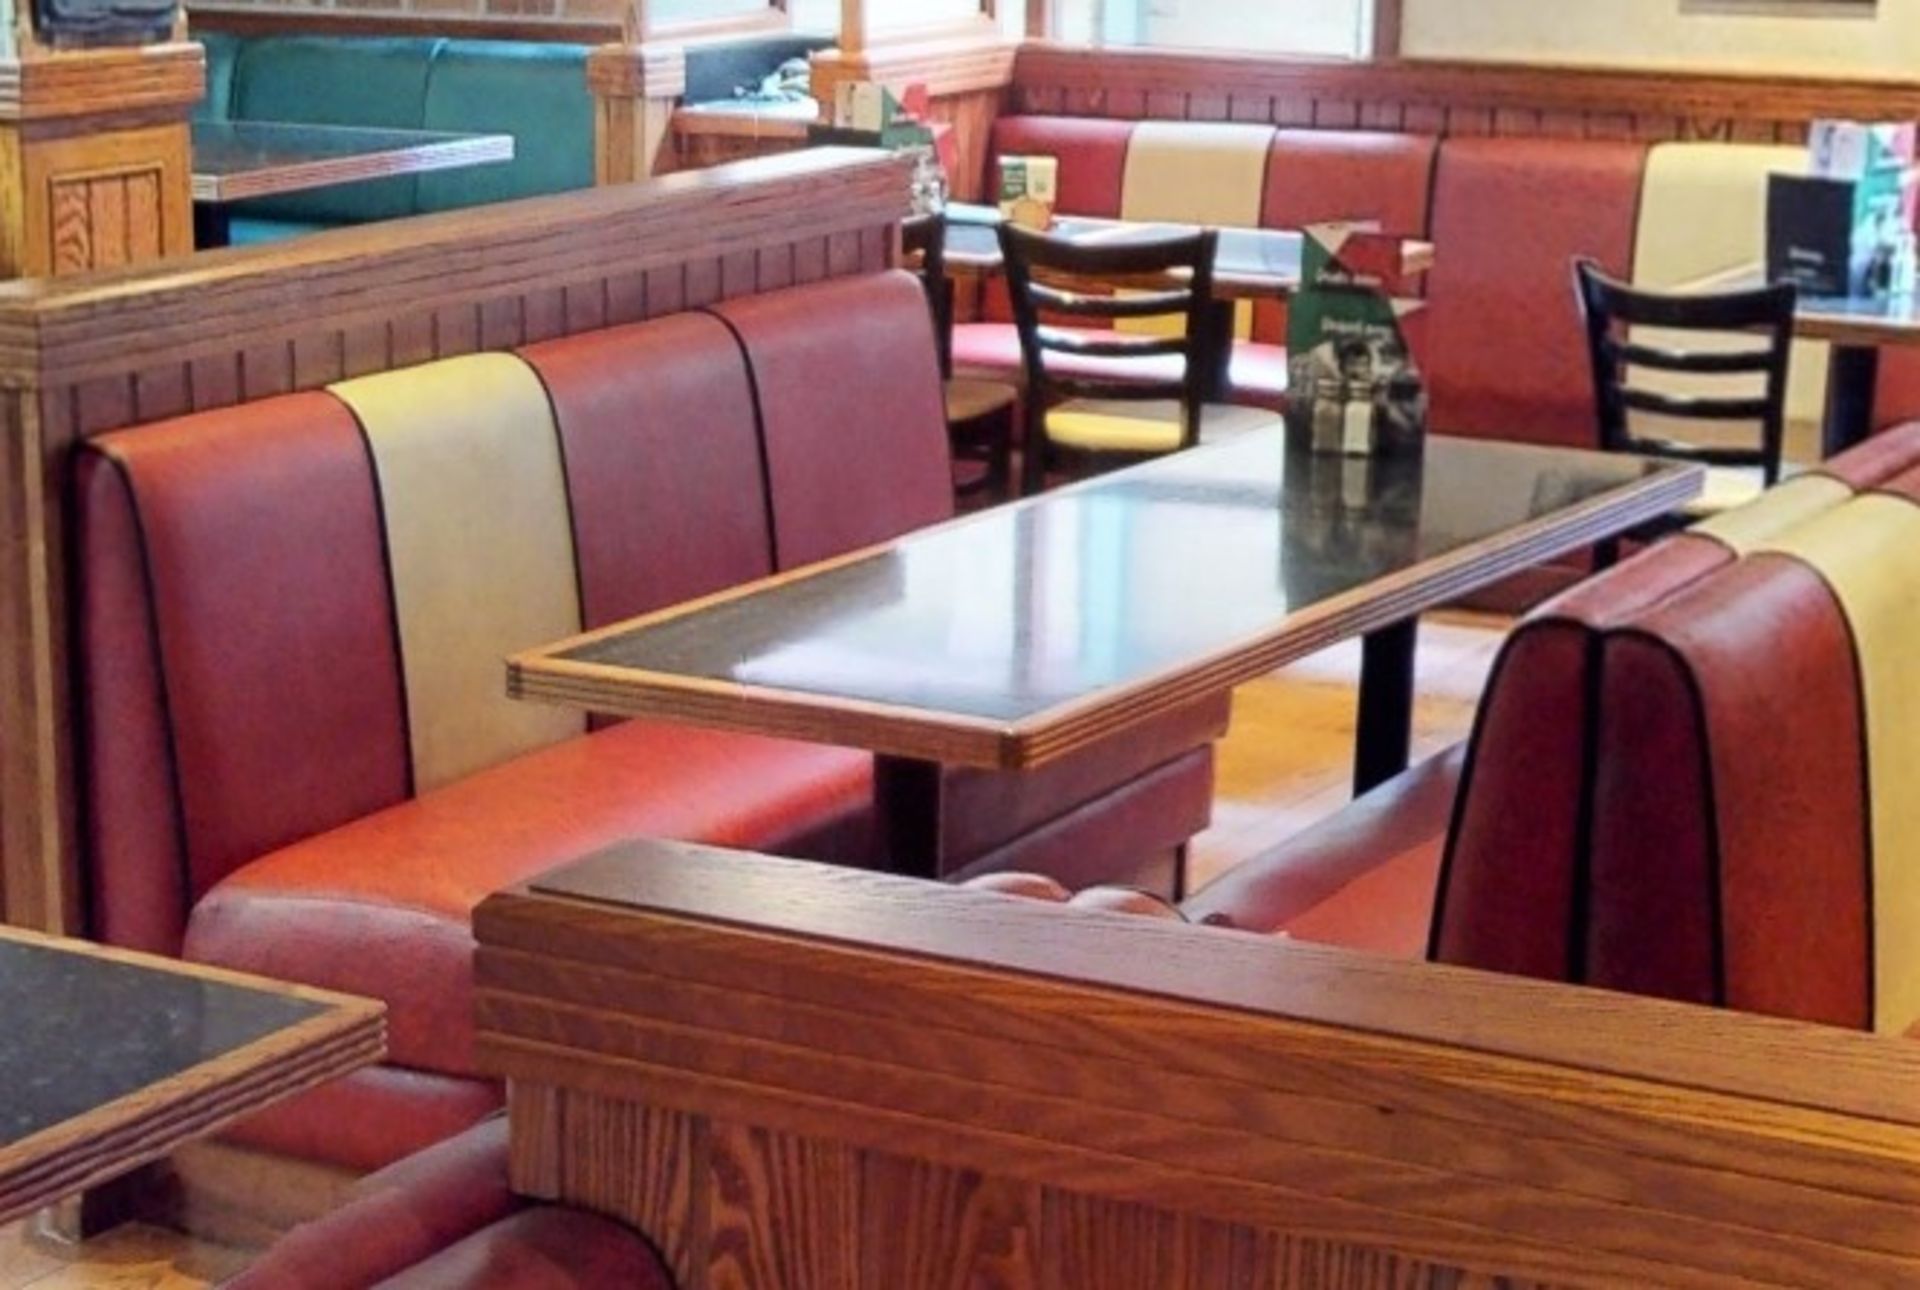 1 x Selection of Double Seating Benches and Dining Tables to Seat Upto 12 Persons - Retro 1950's - Image 5 of 5